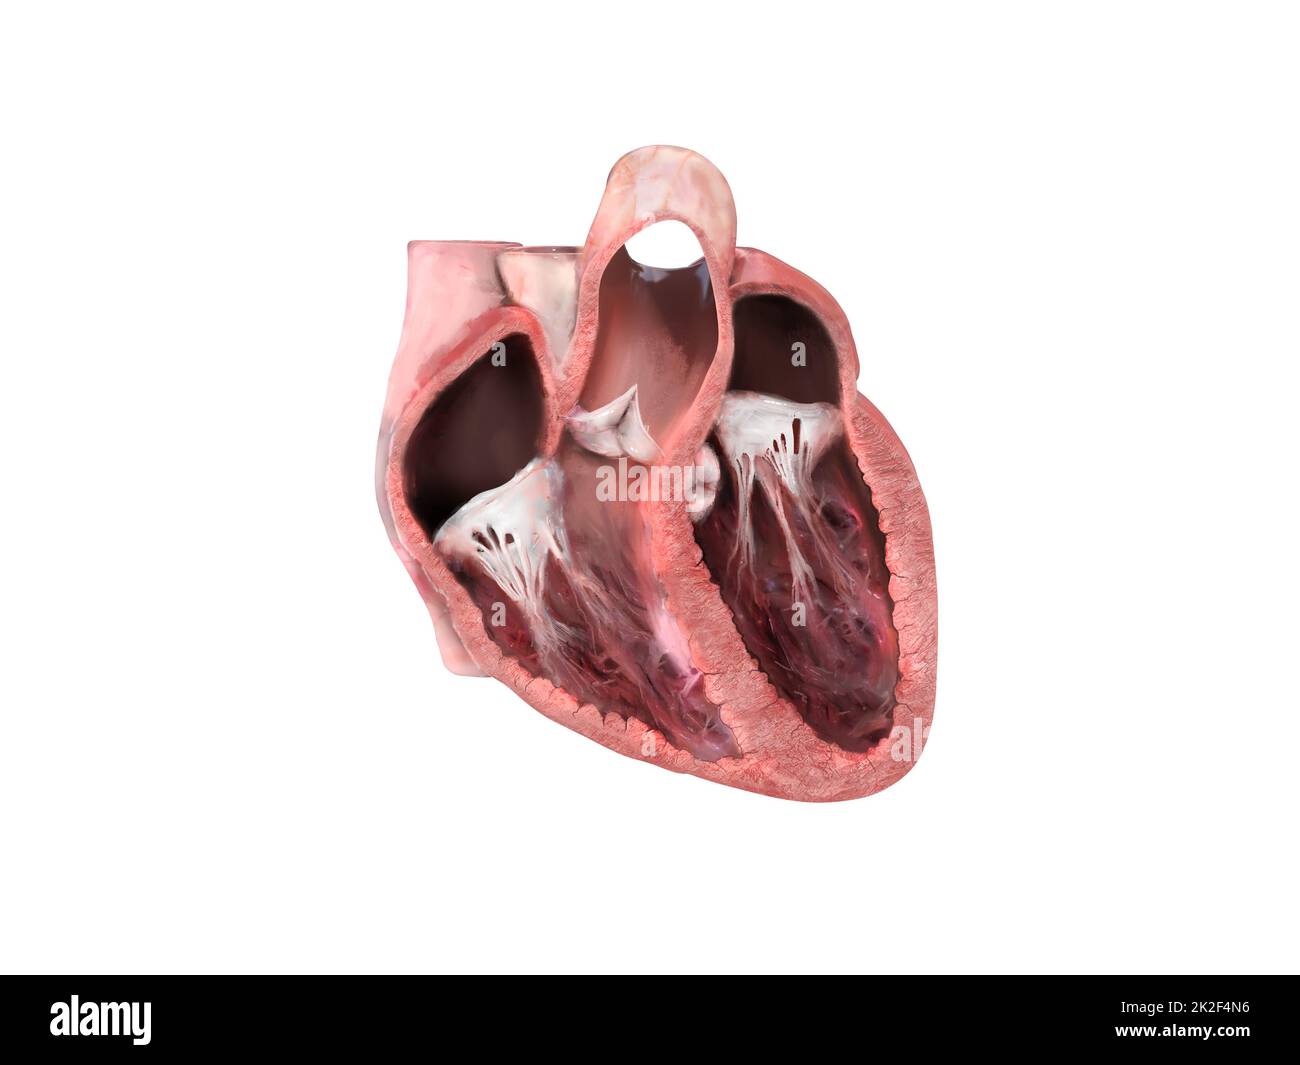 human heart anatomy. Educational diagram showing blood flow with main parts labeled. anatomical heart section, right and left ventricle and septum, heart valve, heart attack, heart problems, 3d render Stock Photo